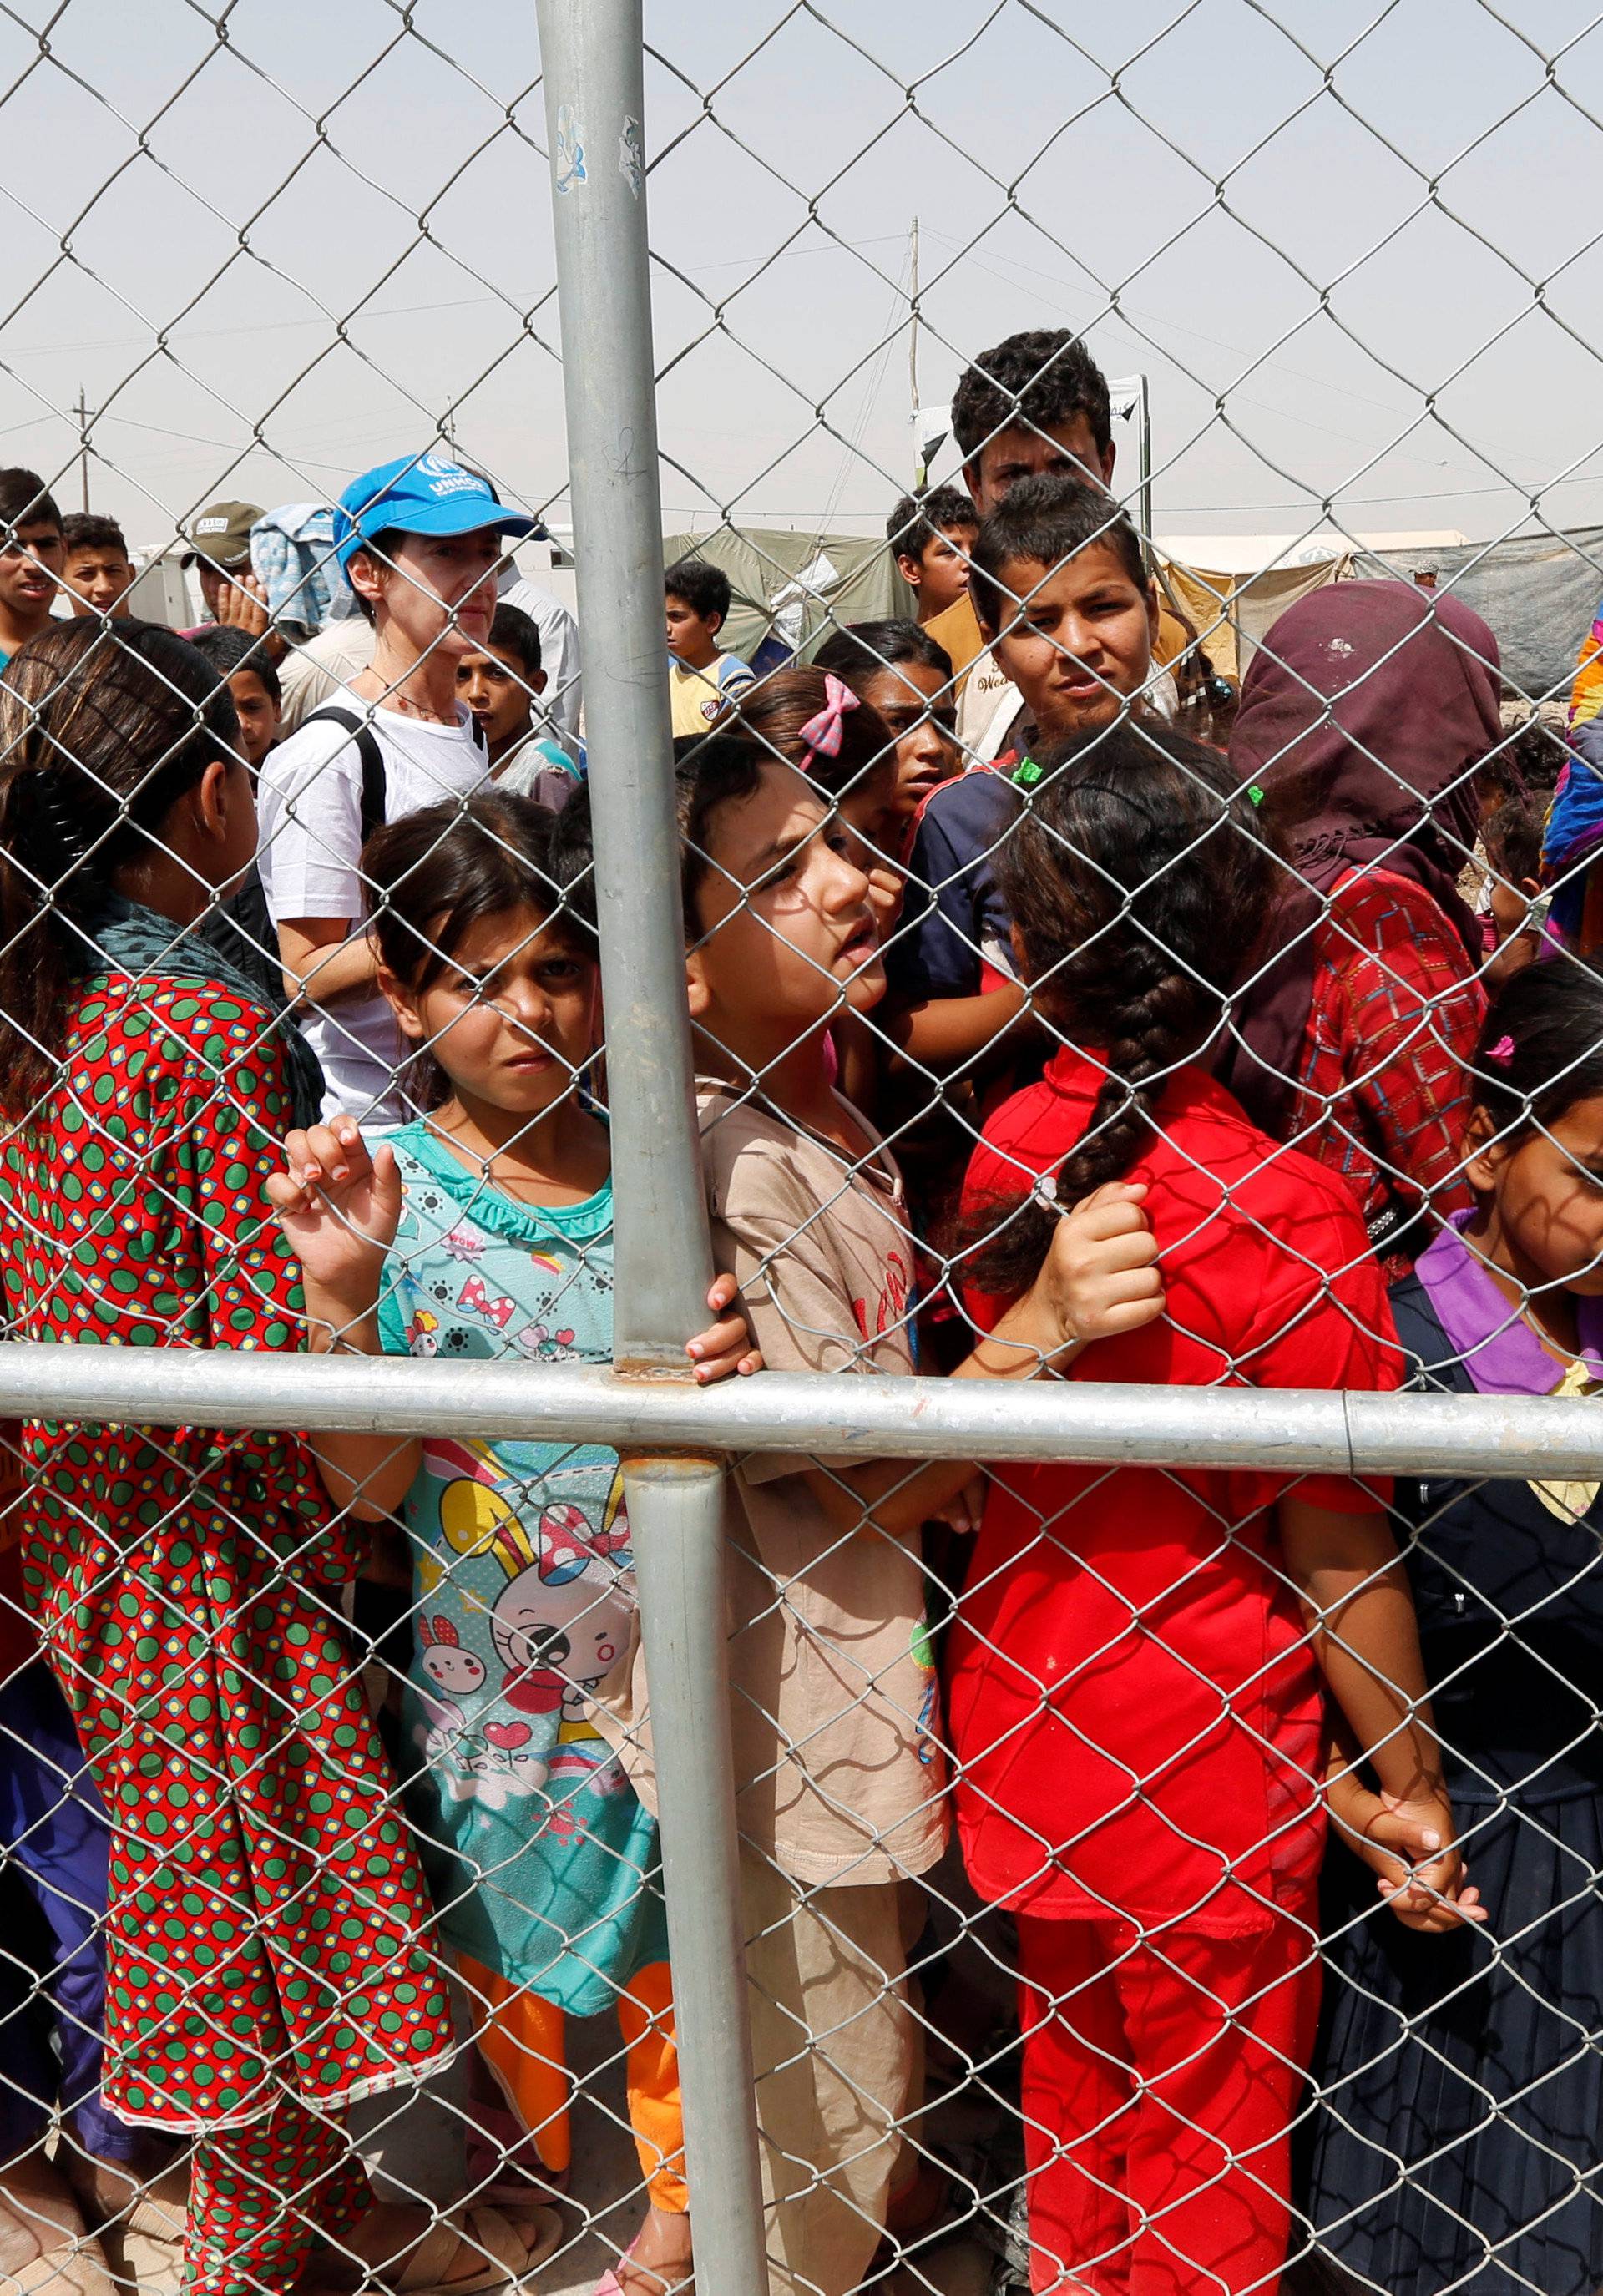 Displaced people look through barbed wire during World Refugee Day celebrations at Al-salam refugee camp in Baghdad